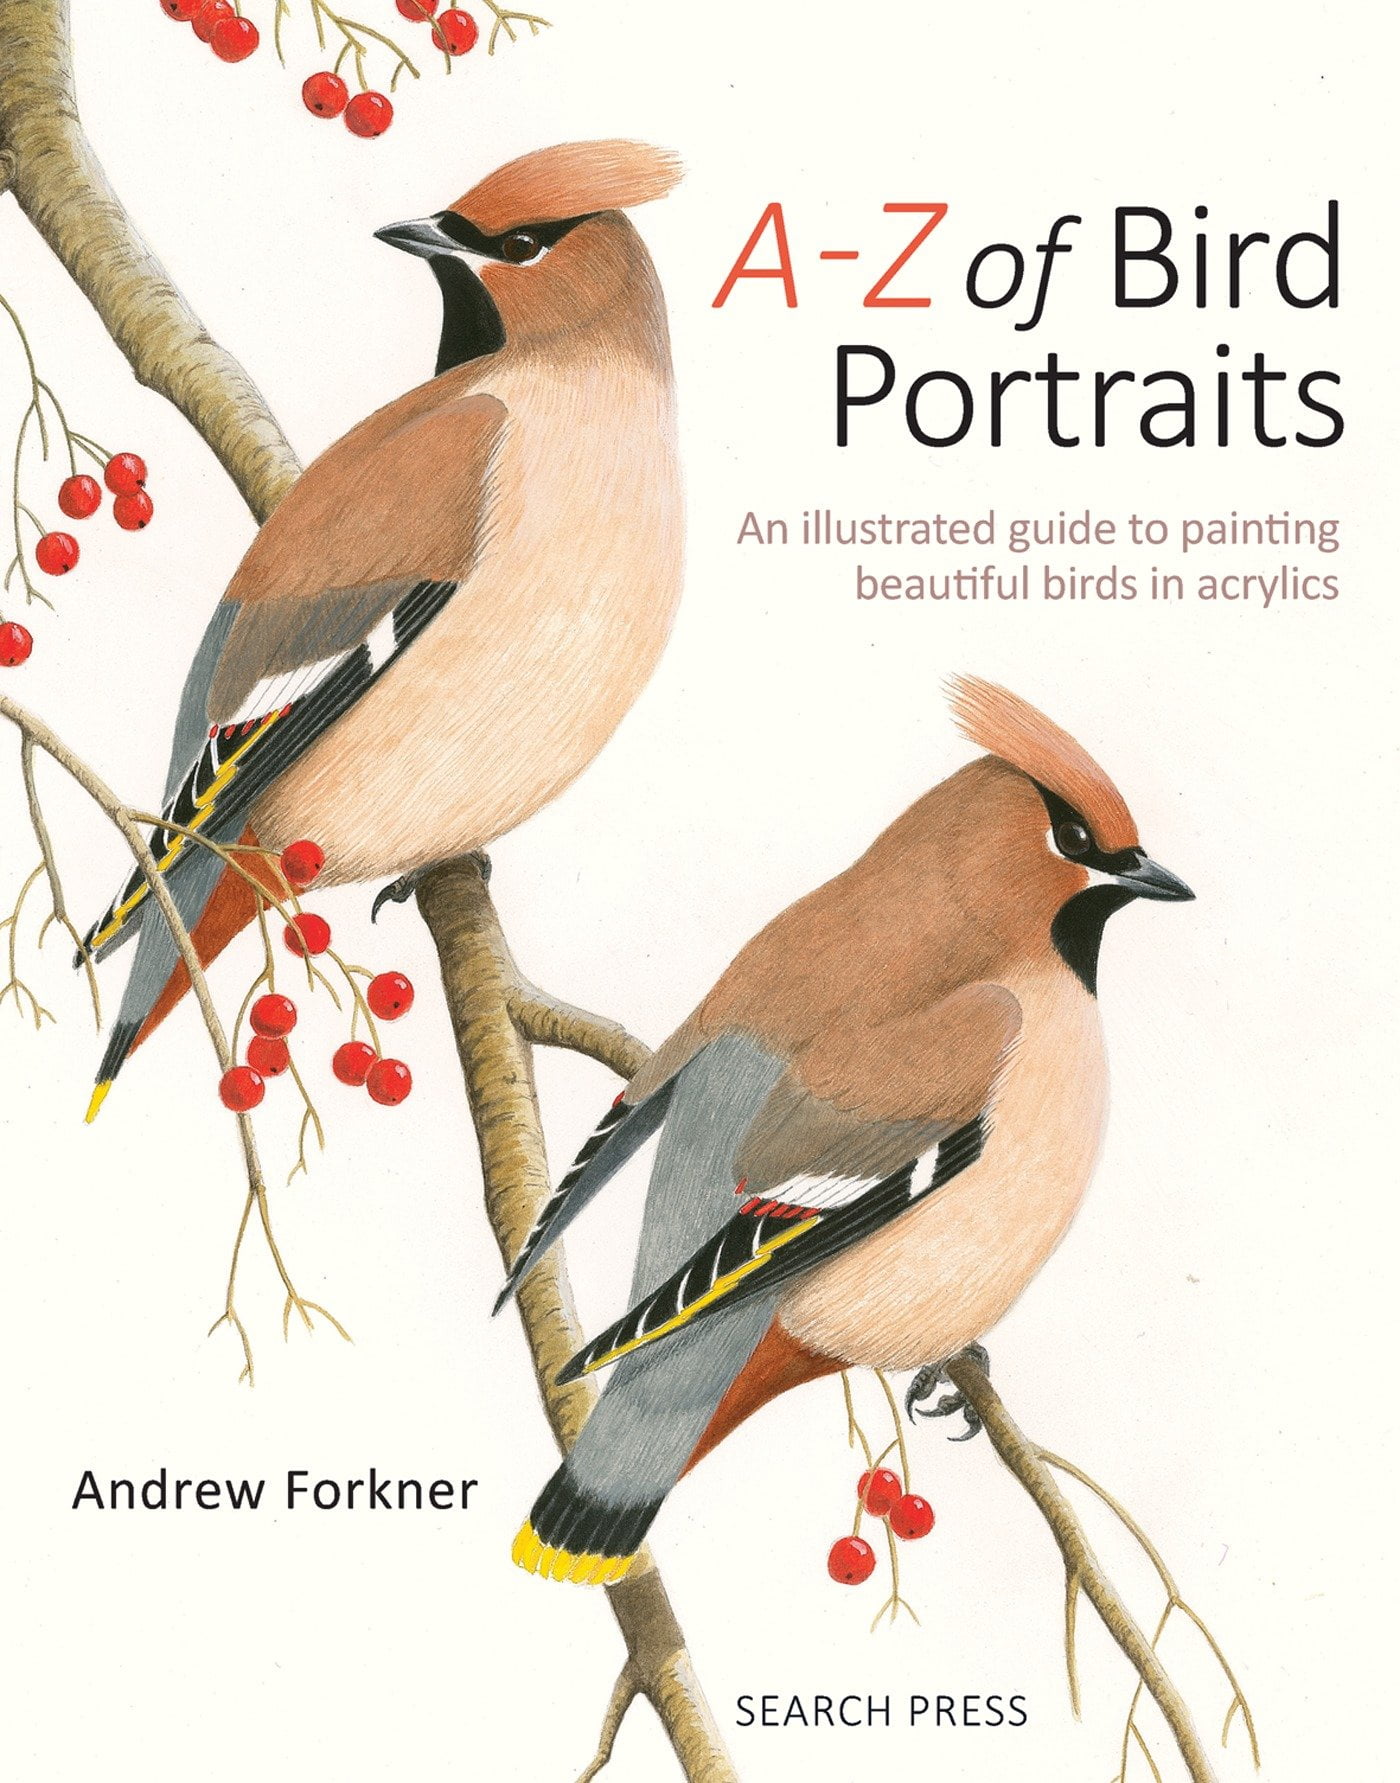 AZ-of-Bird-Portraits-An-illustrated-guide-to-painting-beautiful-birds-in-acrylics